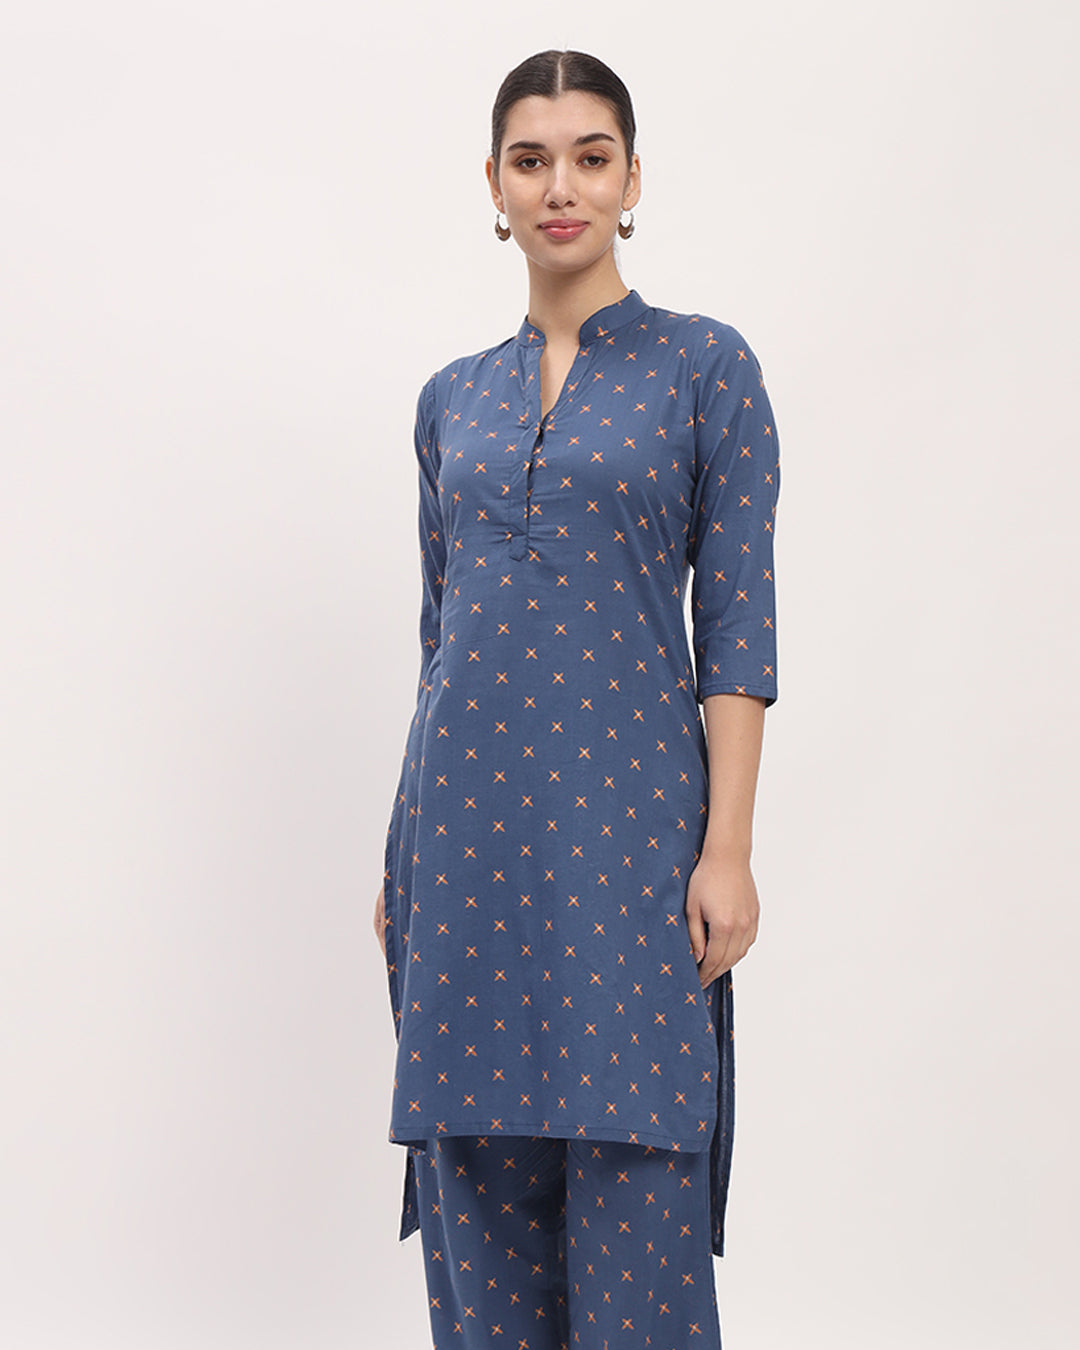 Blue Starry Tropical High-Low Printed Kurta (Without Bottoms)